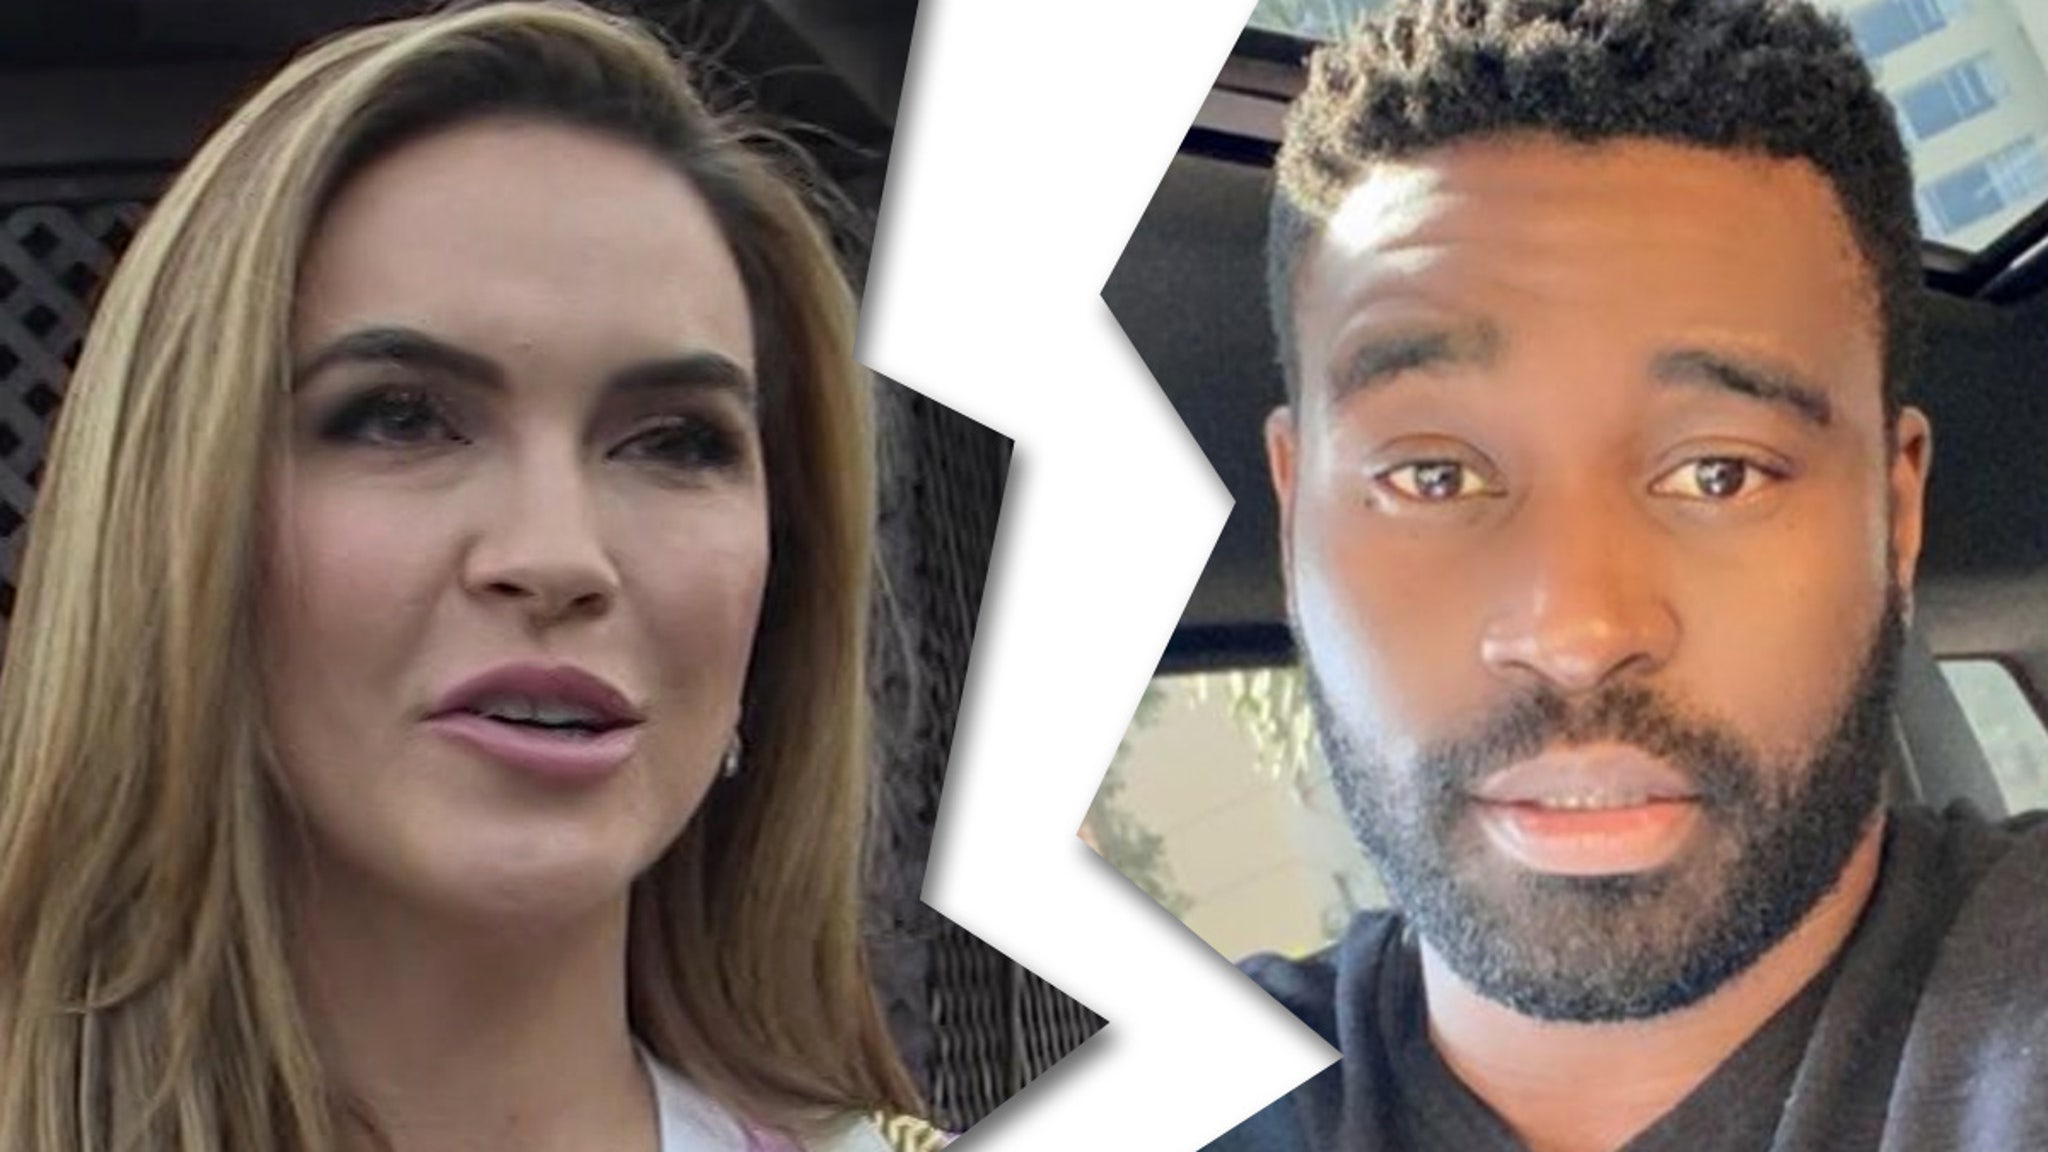 Chrishell Stause and Keo Motsepe split after 3 months of appointments